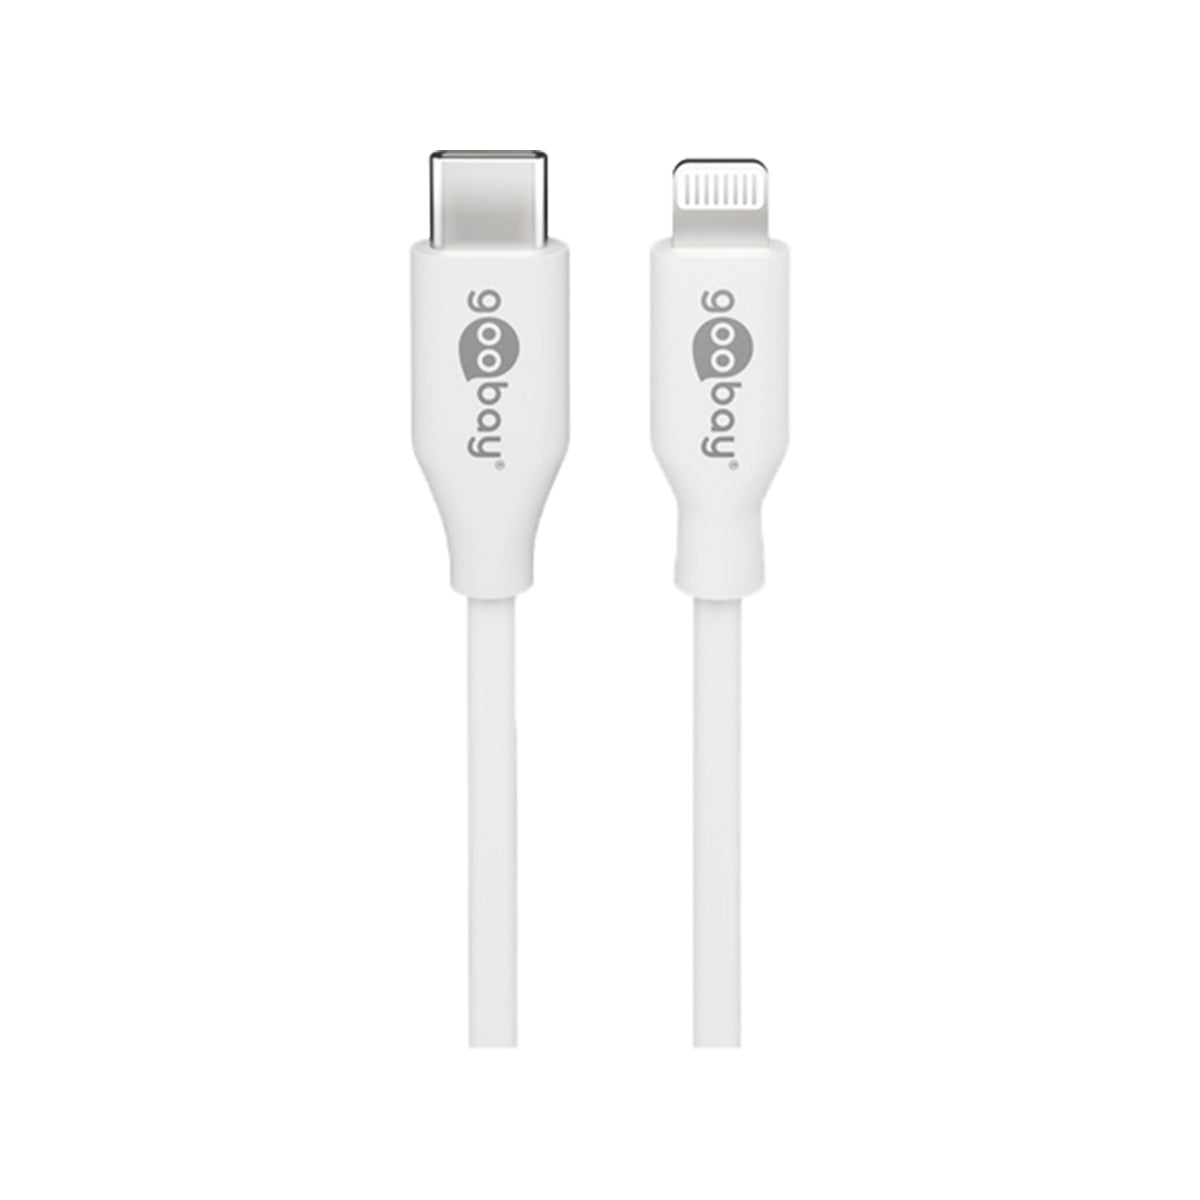 Goobay USB-C to Lightning Charging and Sync Cable 1m for iPhone/iPad/iPod/AirPod - White